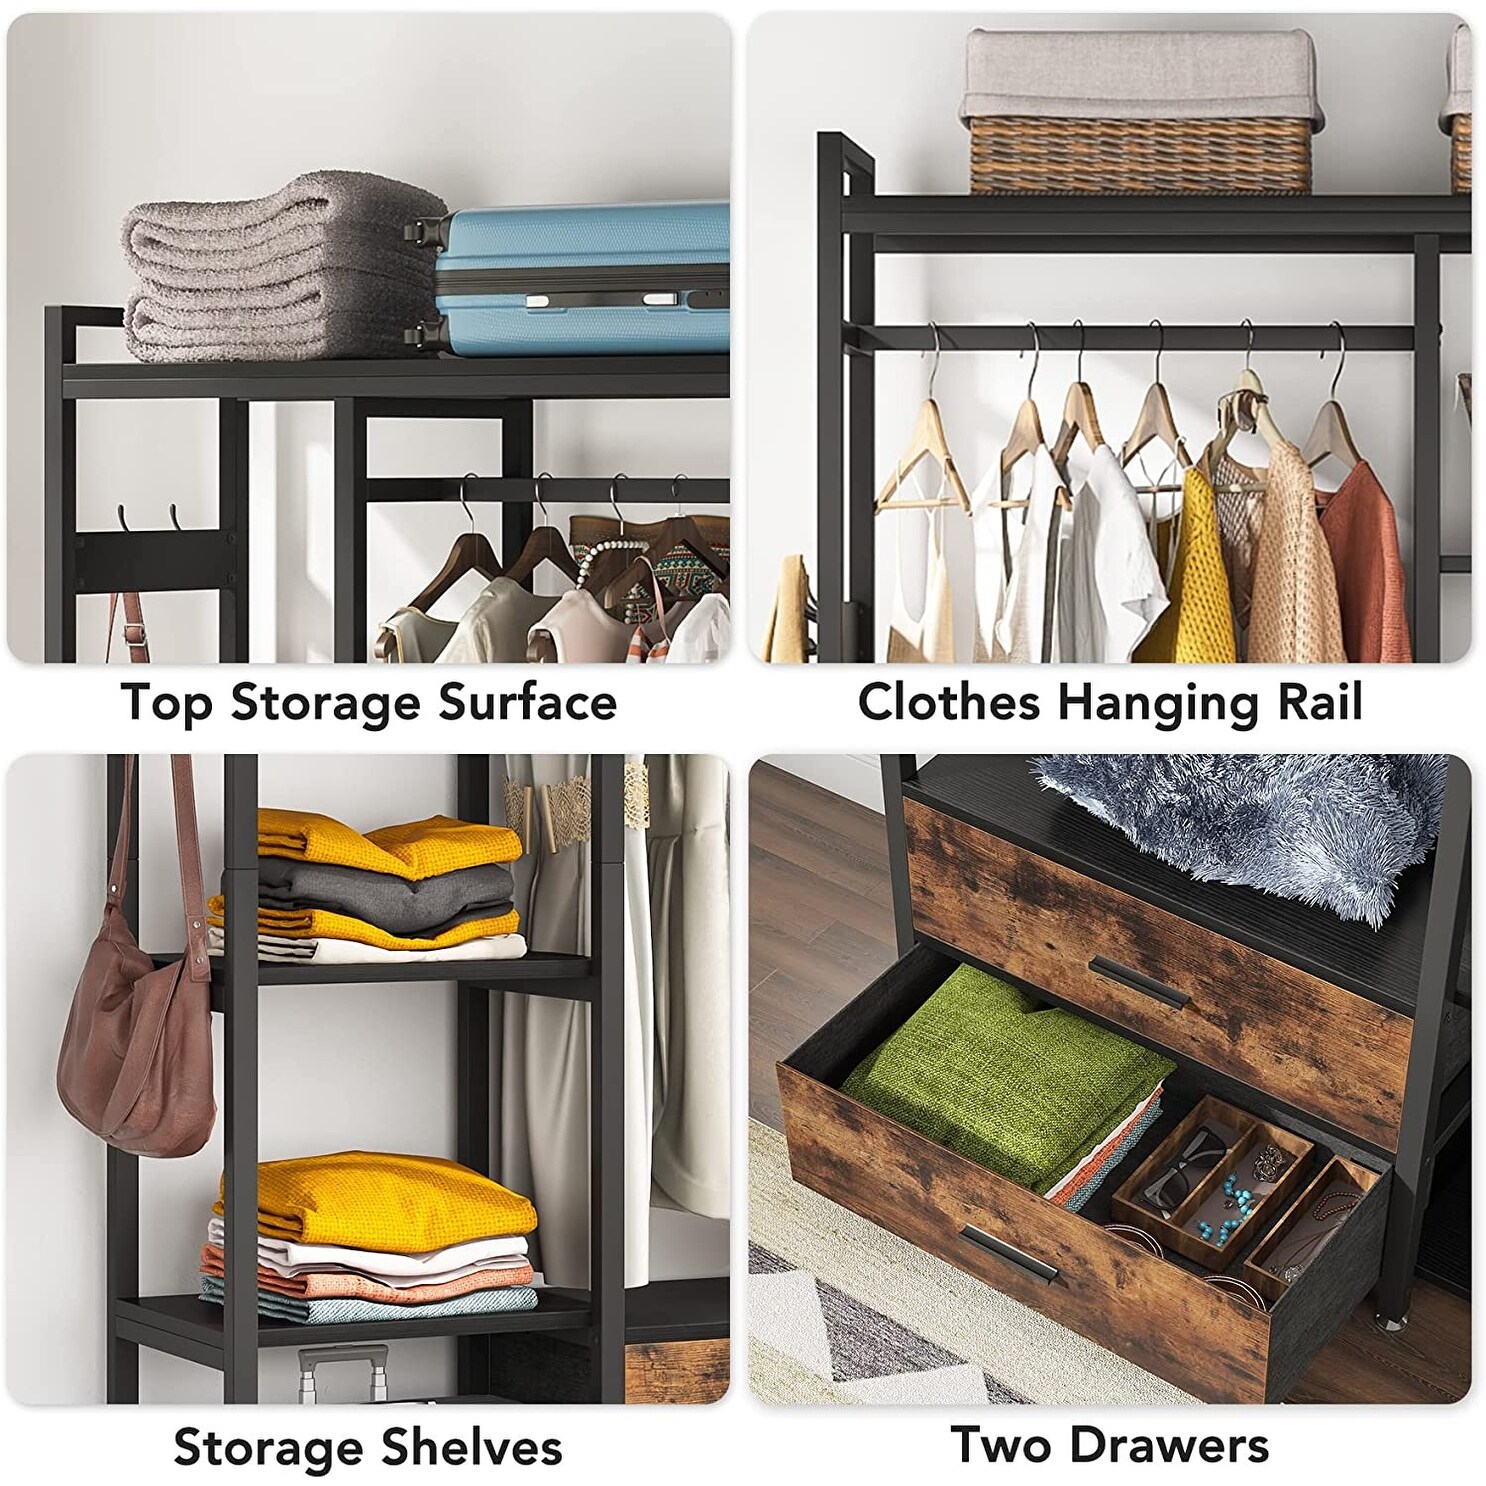 https://ak1.ostkcdn.com/images/products/is/images/direct/310f9178daf6dc0bdf0061d51d8f0c9da2d67ea0/Freestanding-Closet-Organizer%2C-Clothes-Rack-with-Drawers-and-Shelves%2C-Heavy-Duty-Garment-Rack.jpg